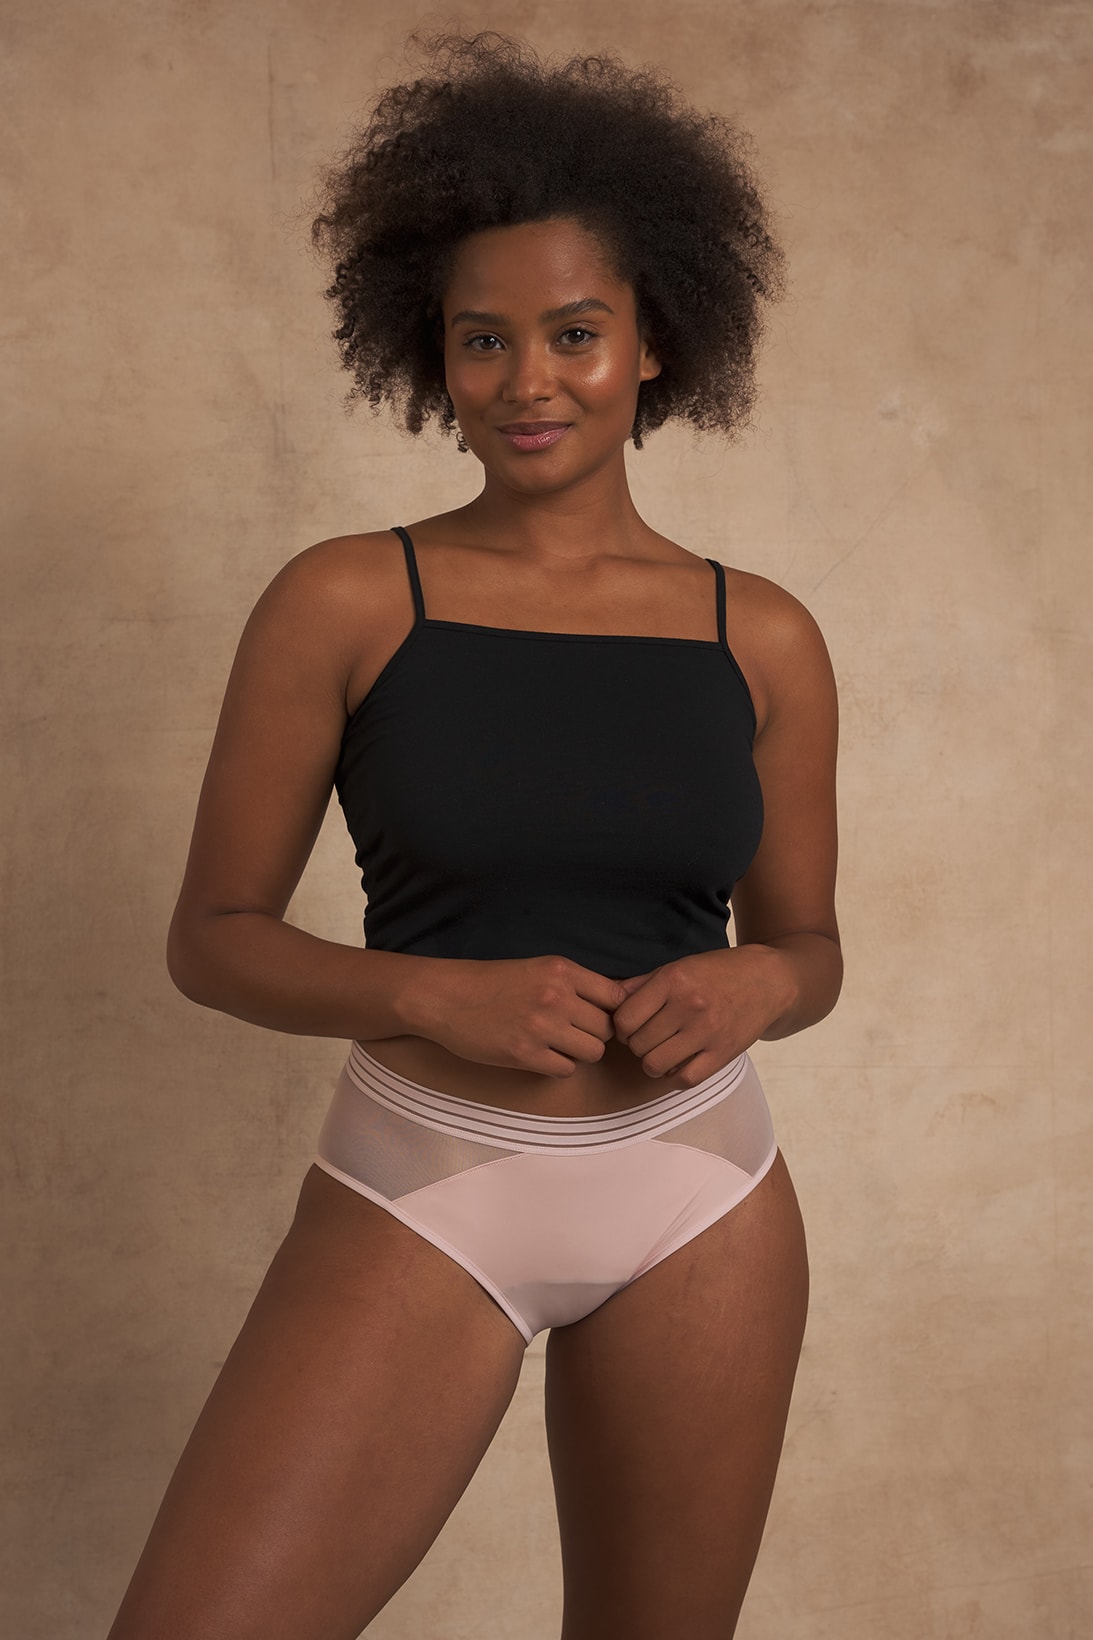 https://image-cdn.hypb.st/https%3A%2F%2Fhypebeast.com%2Fwp-content%2Fblogs.dir%2F6%2Ffiles%2F2020%2F11%2Fsaalt-period-menstruation-underwear-collection-leakproof-sustainable-non-toxic-price-where-to-buy-1.jpg?cbr=1&q=90